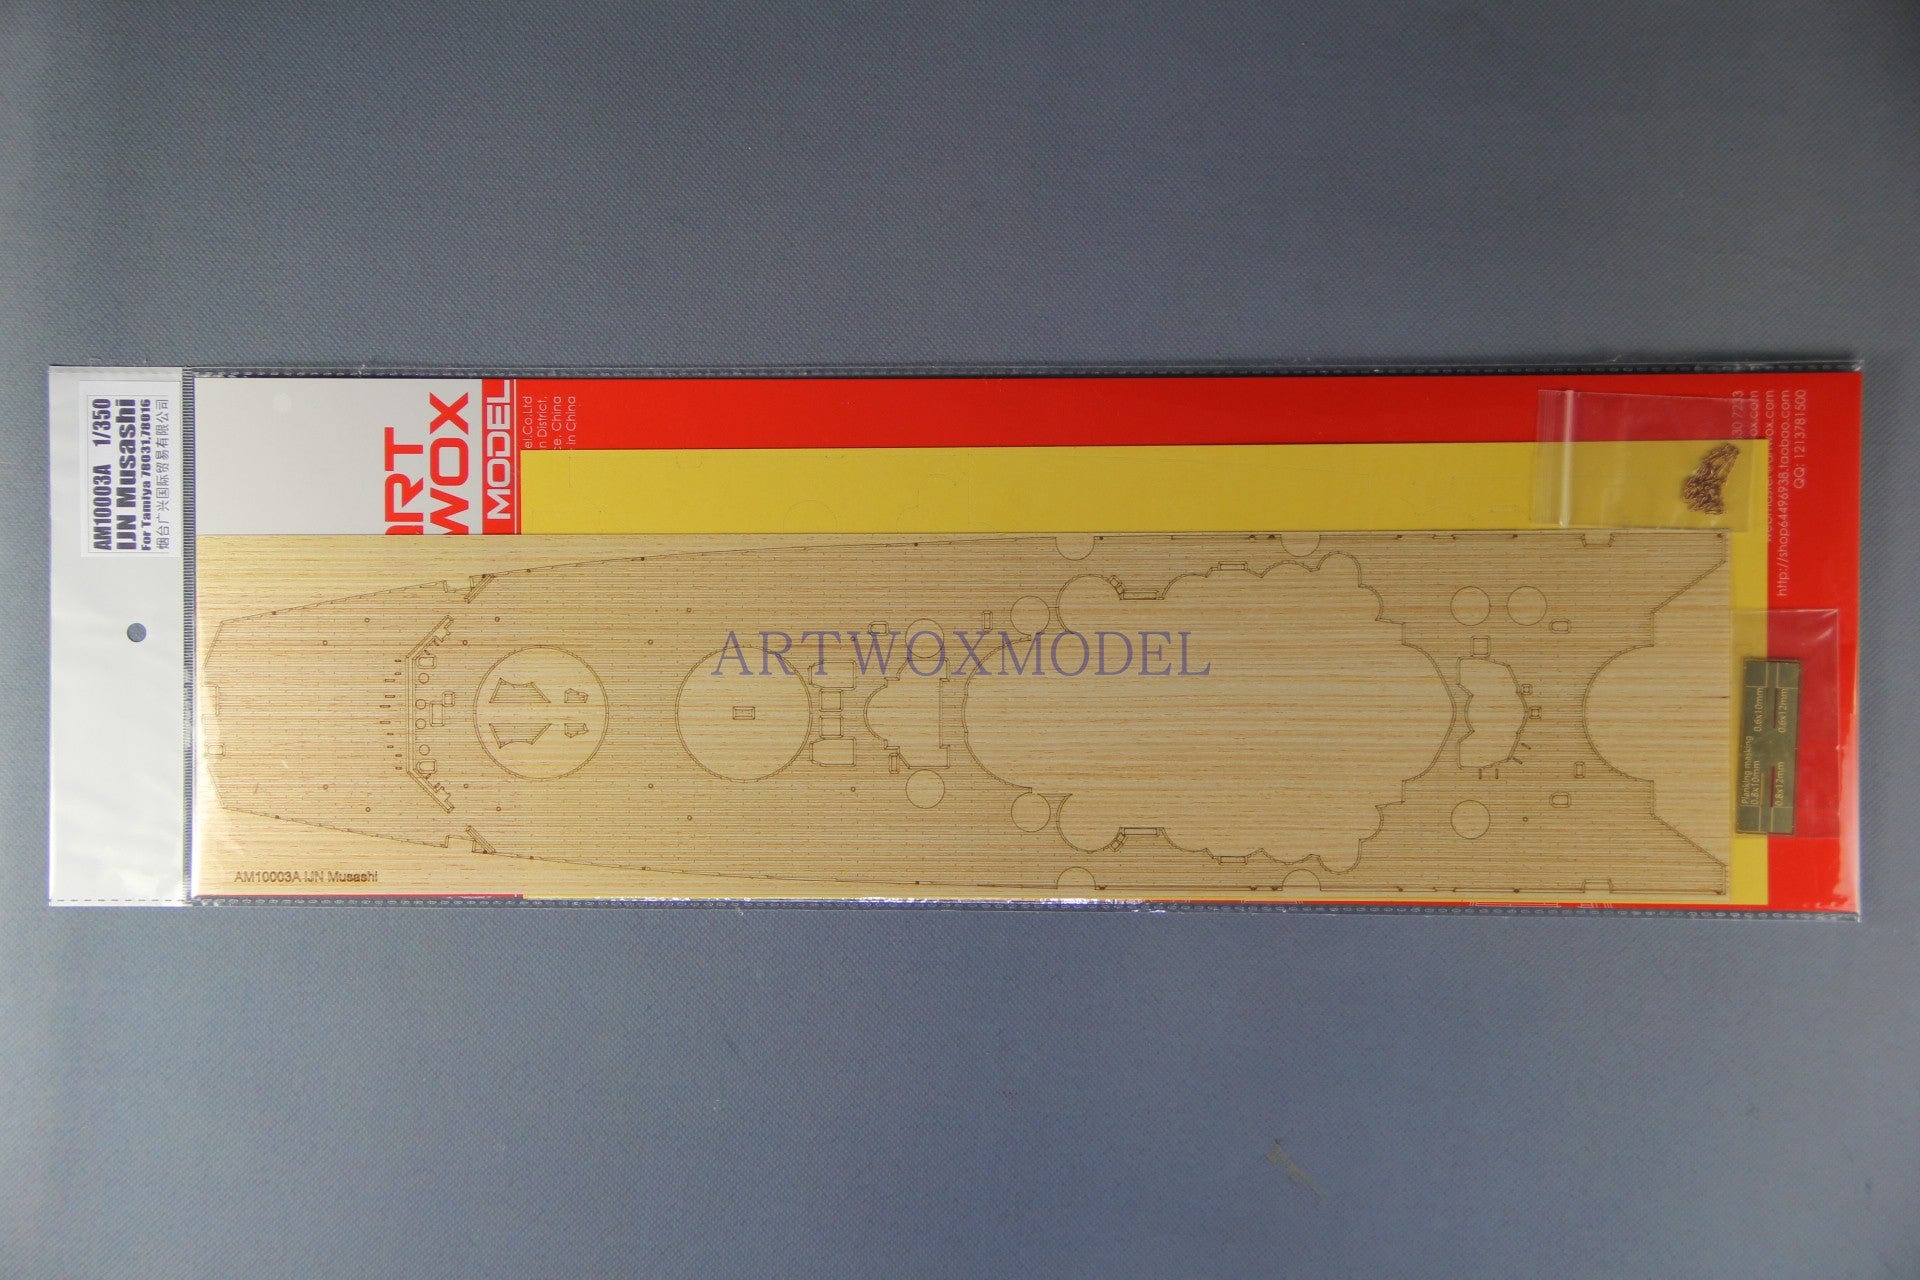 Artwox model wooden deck for Tamiya 7801678031, battle of warlord 3M, 3M cover paper, PE wood deck AM10003A